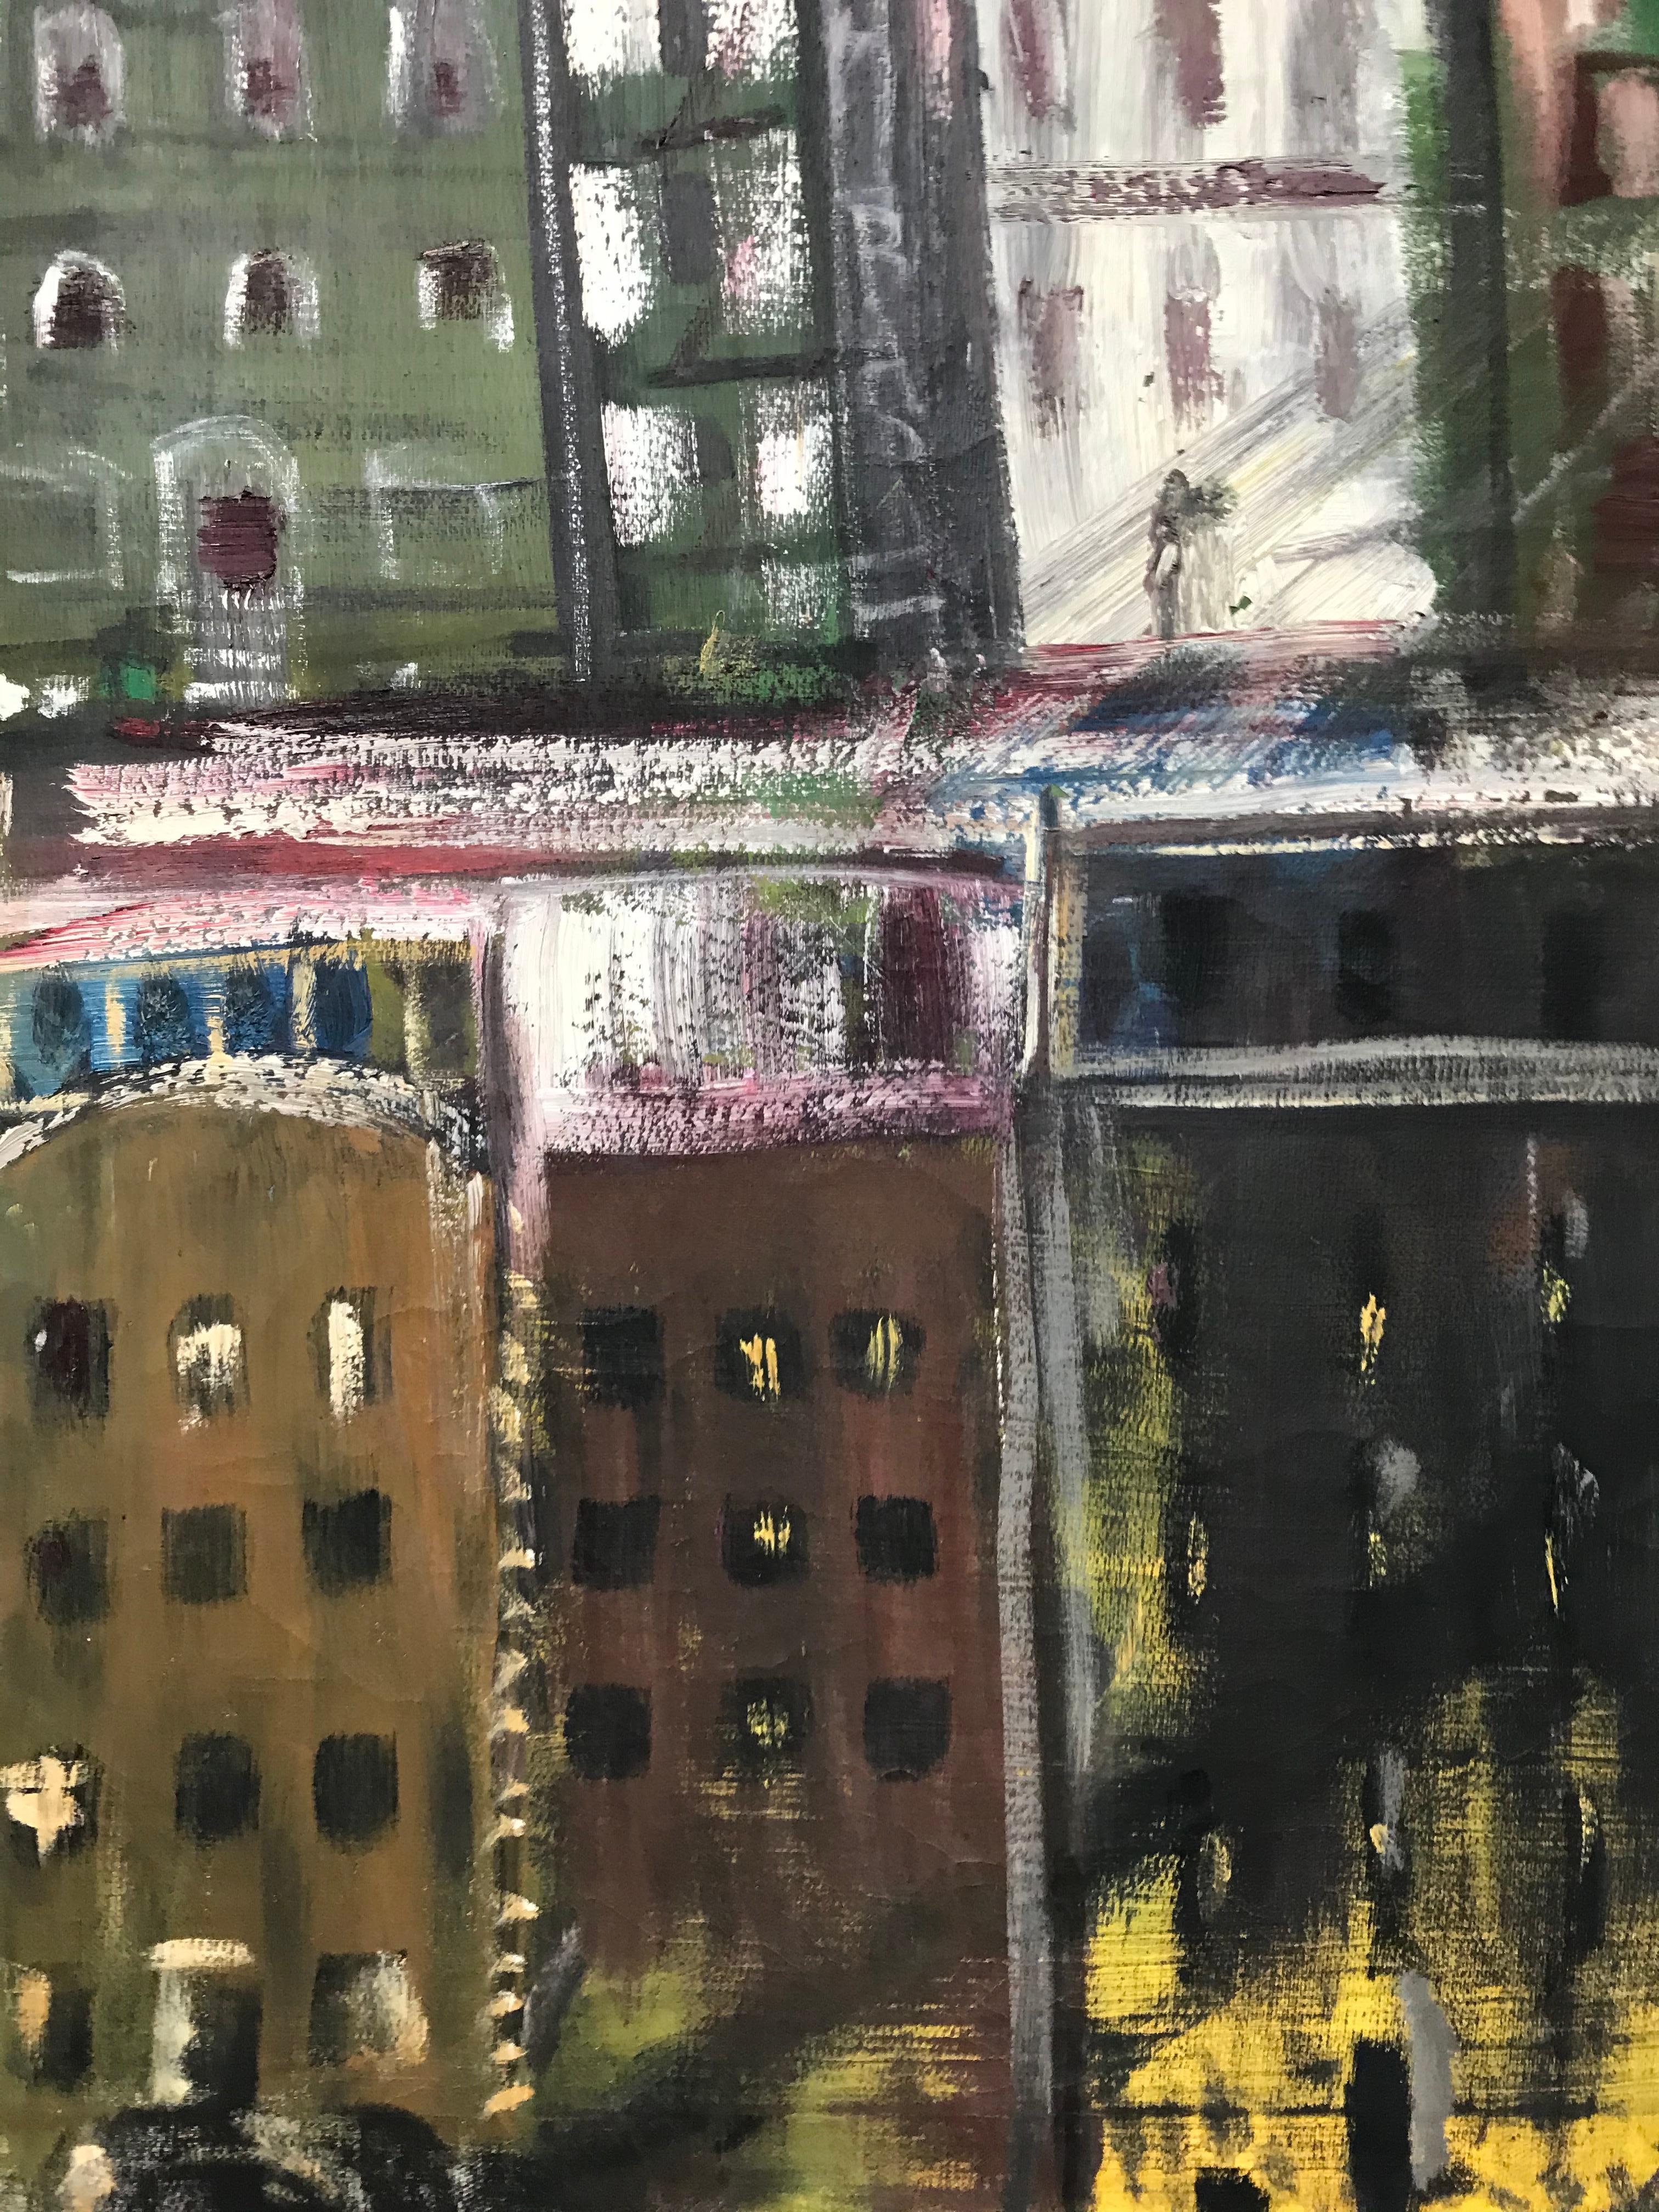 Excellent large modernist cityscape painting that I believe is by Sonia Chaitin - an obscure listed artist. Oil on canvas. Signed 1959. One small puncture - hard to see - photographed. Excellent size, color and subjects. I especially love the small